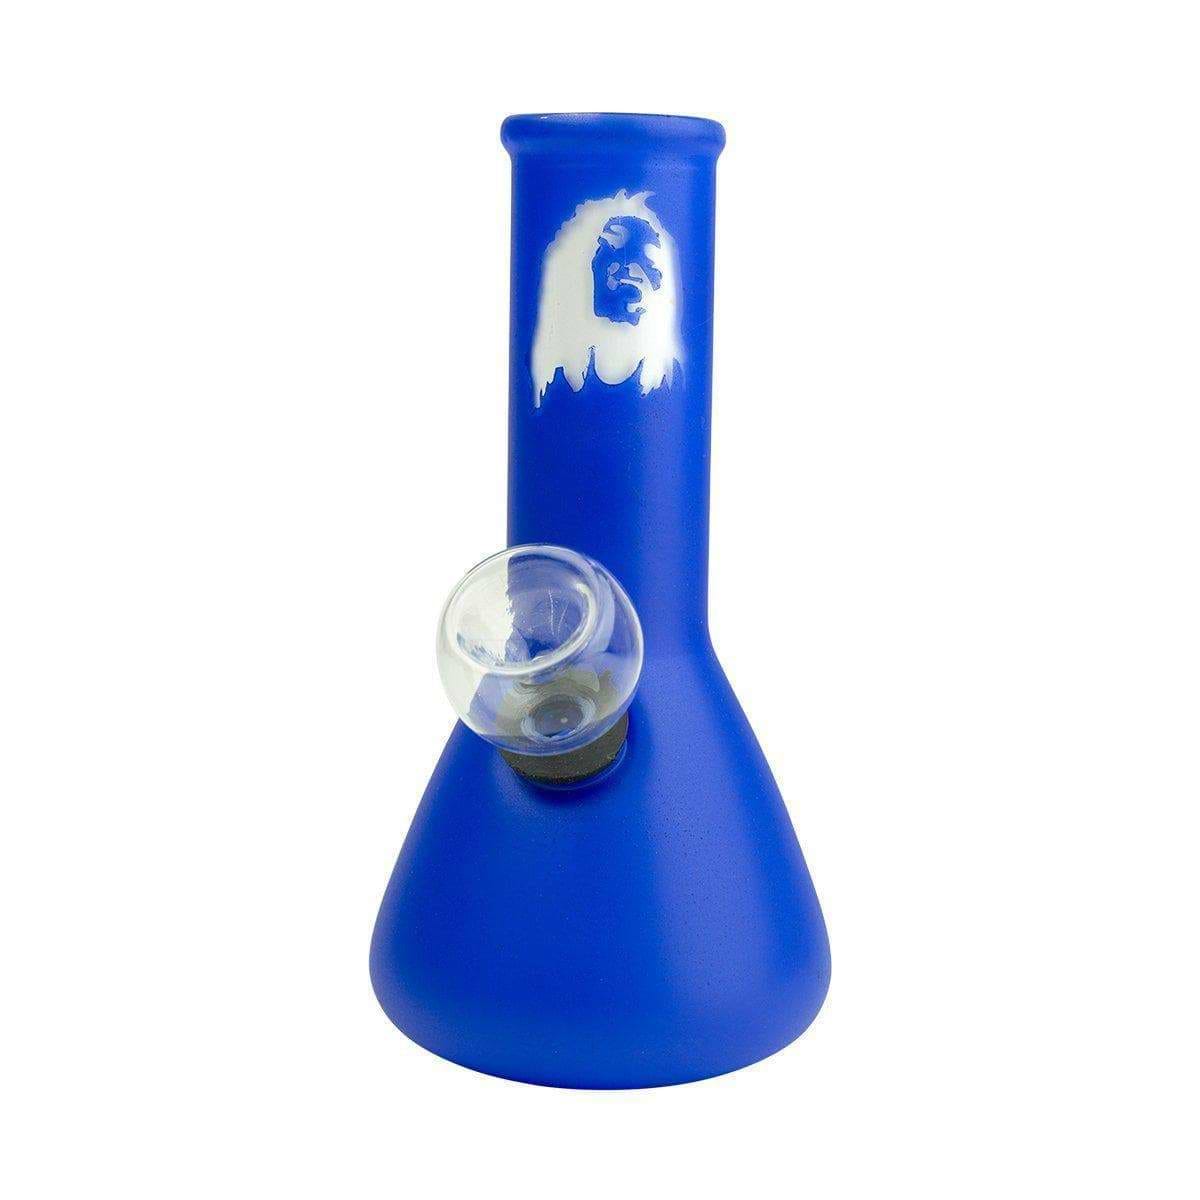 5-inch blue glass carb bong smoking device bright solid color Bob Marley face sillhouette printed on neck